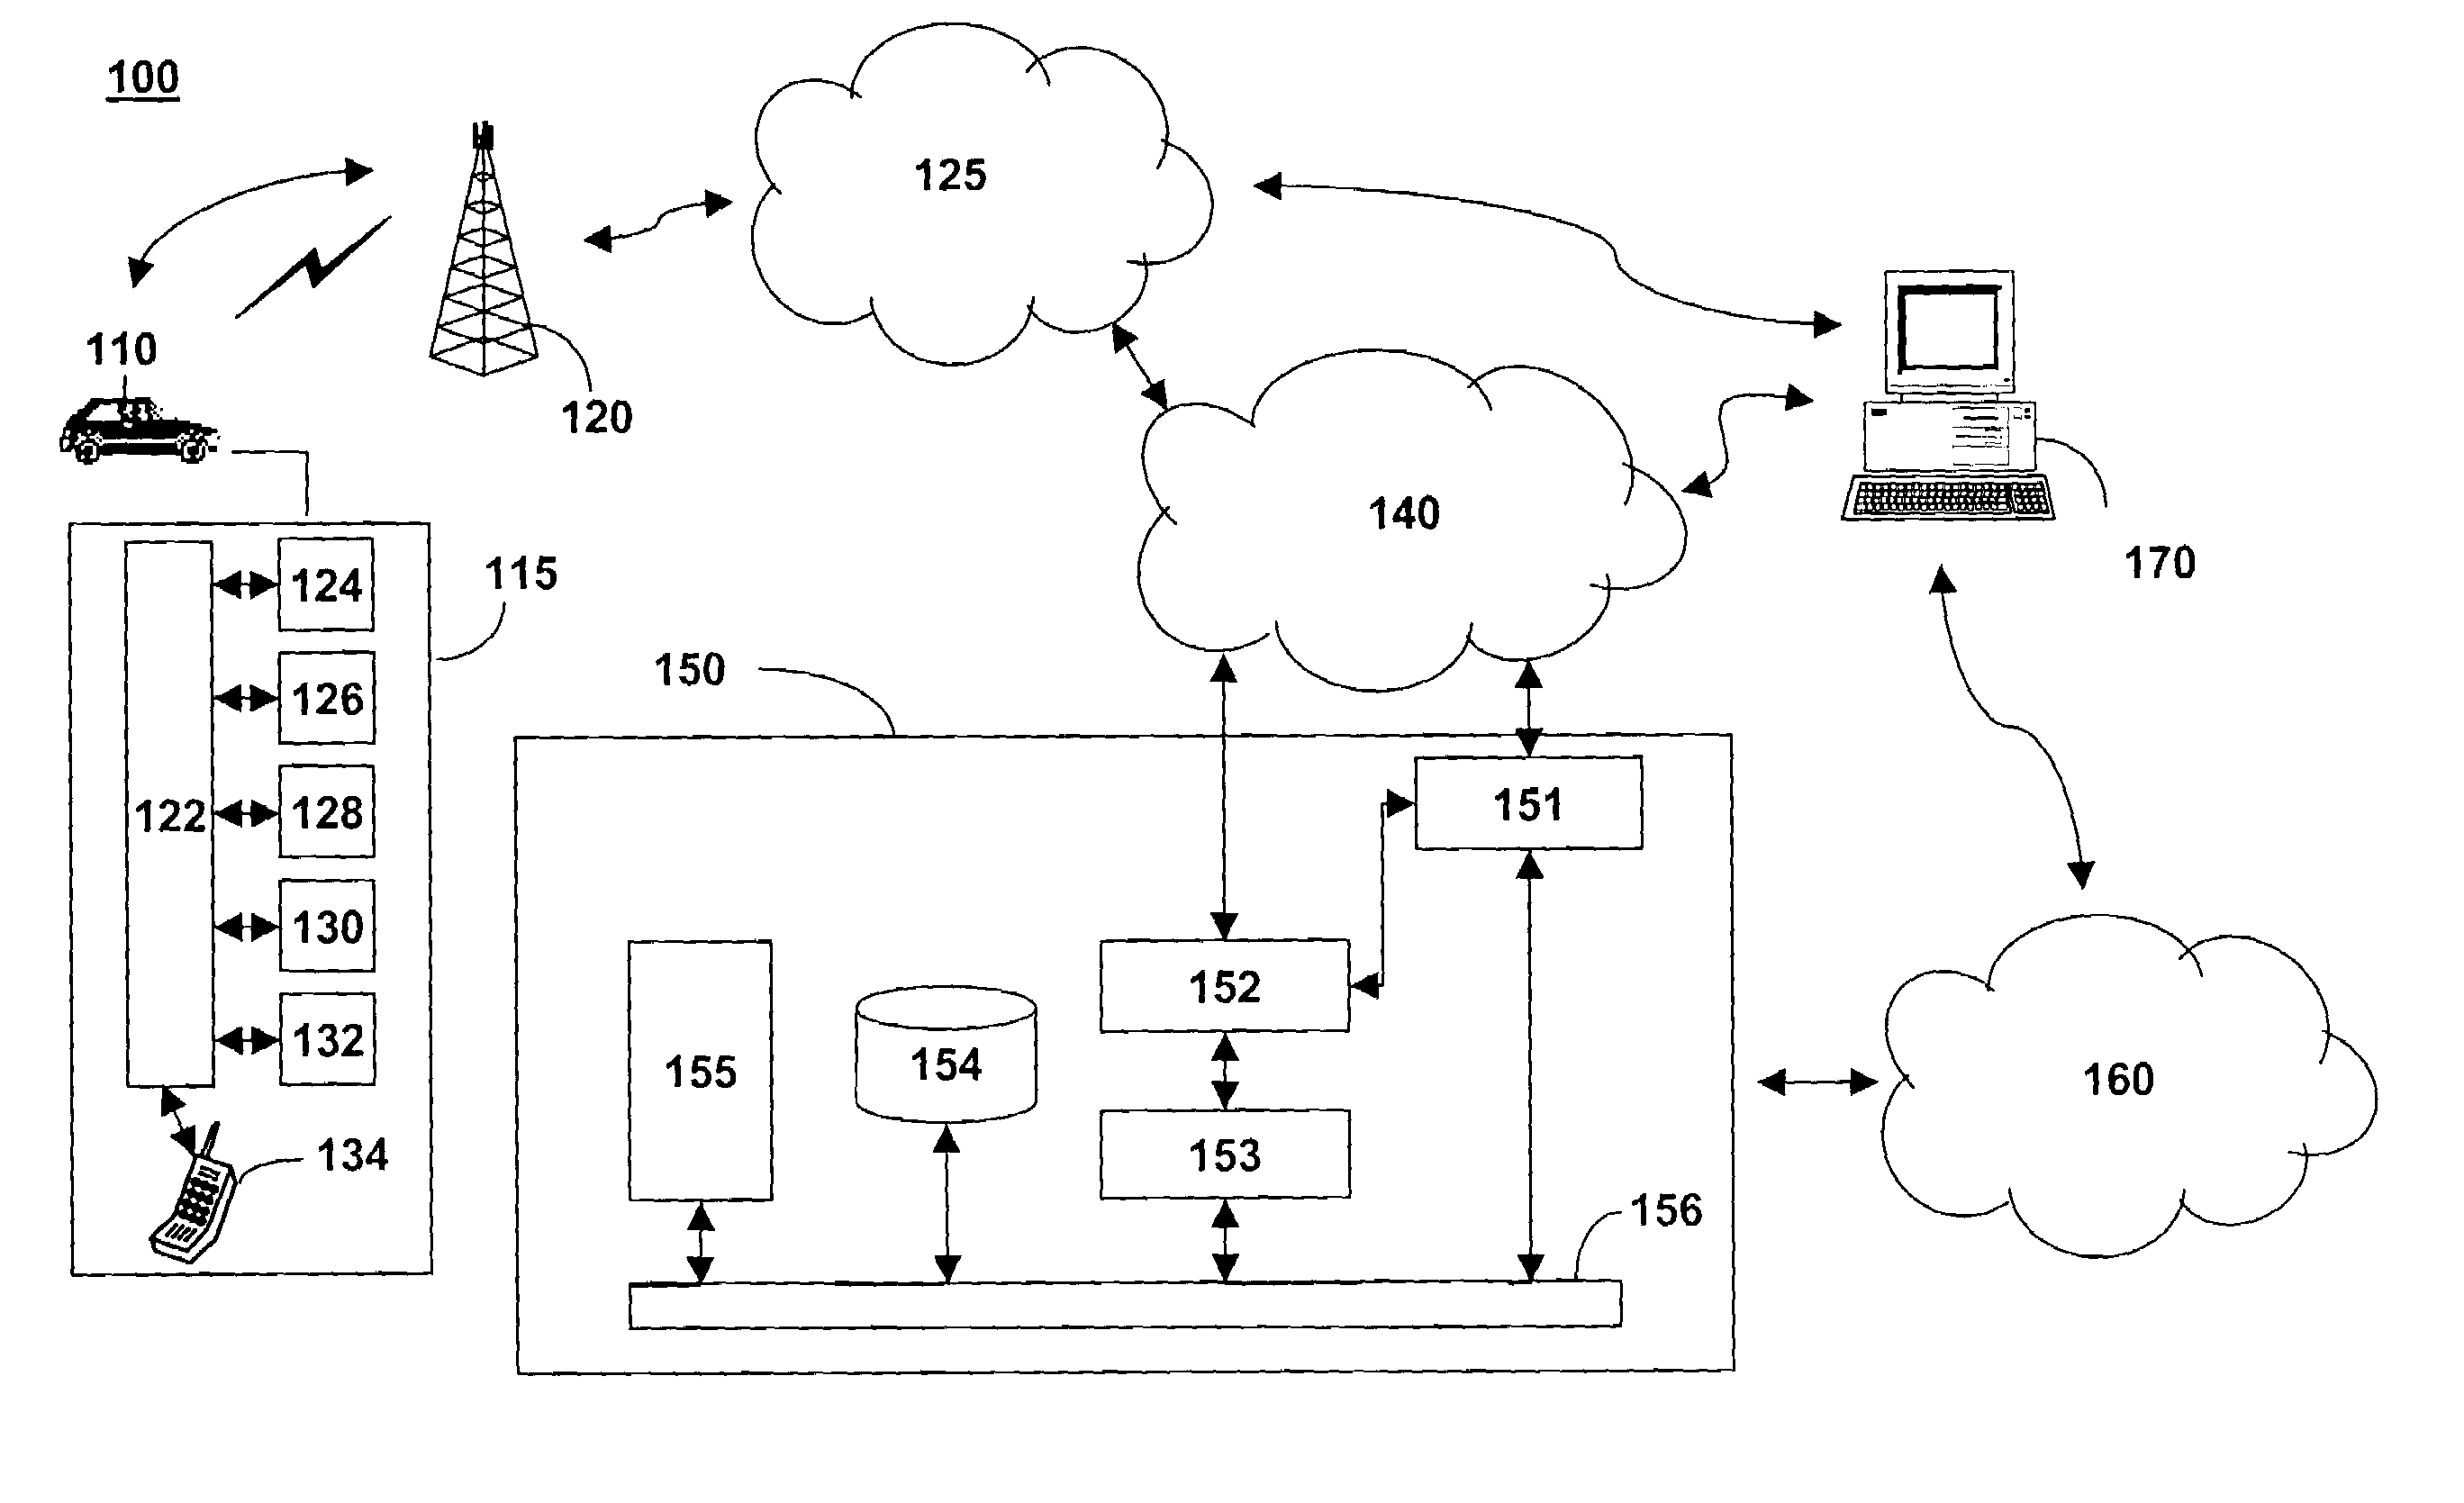 Method and system for providing a carpool service using a telematics system